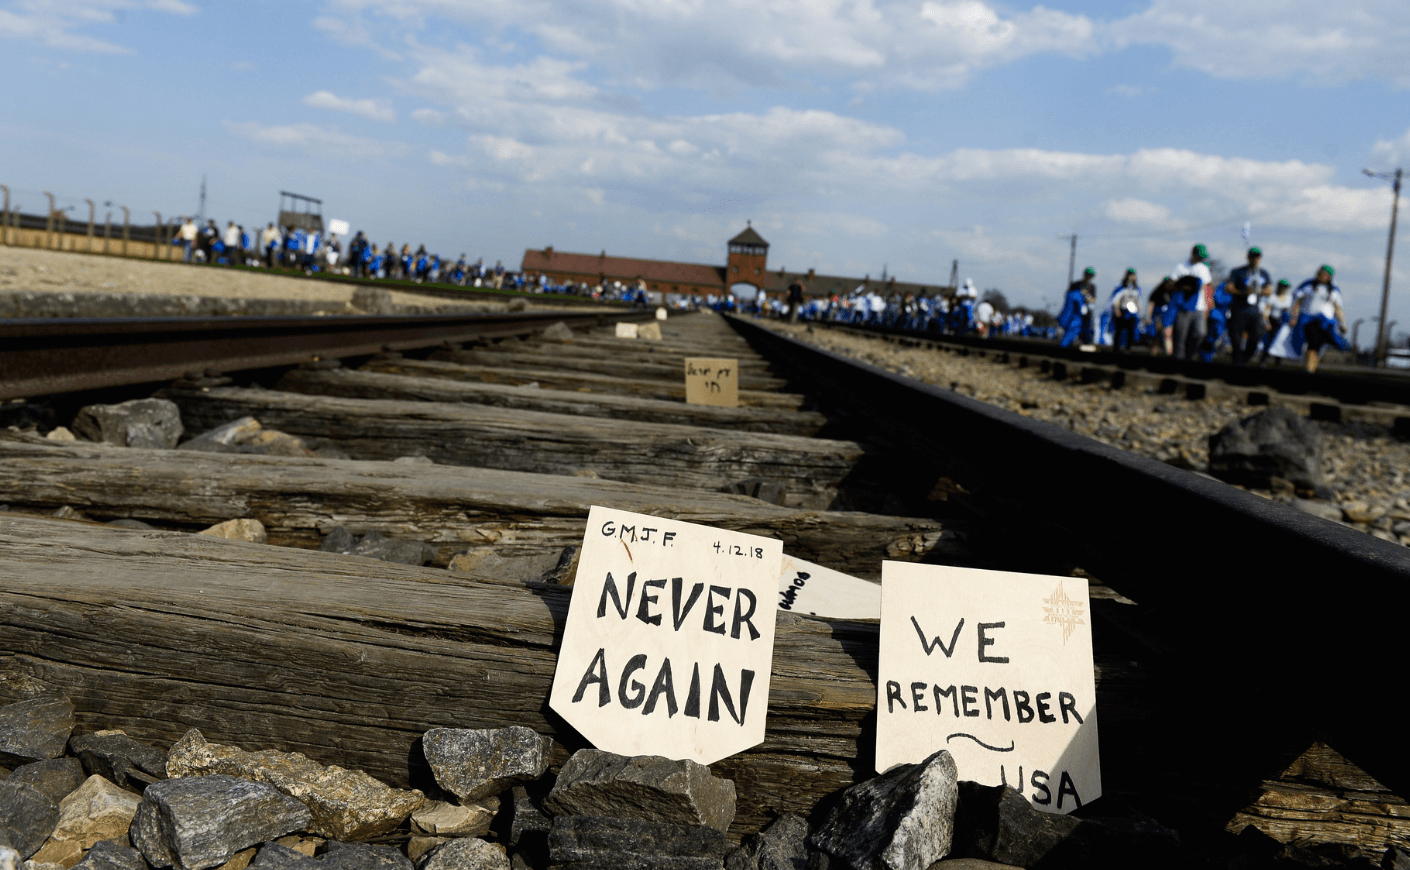 a "Never Again" sign on a railroad track